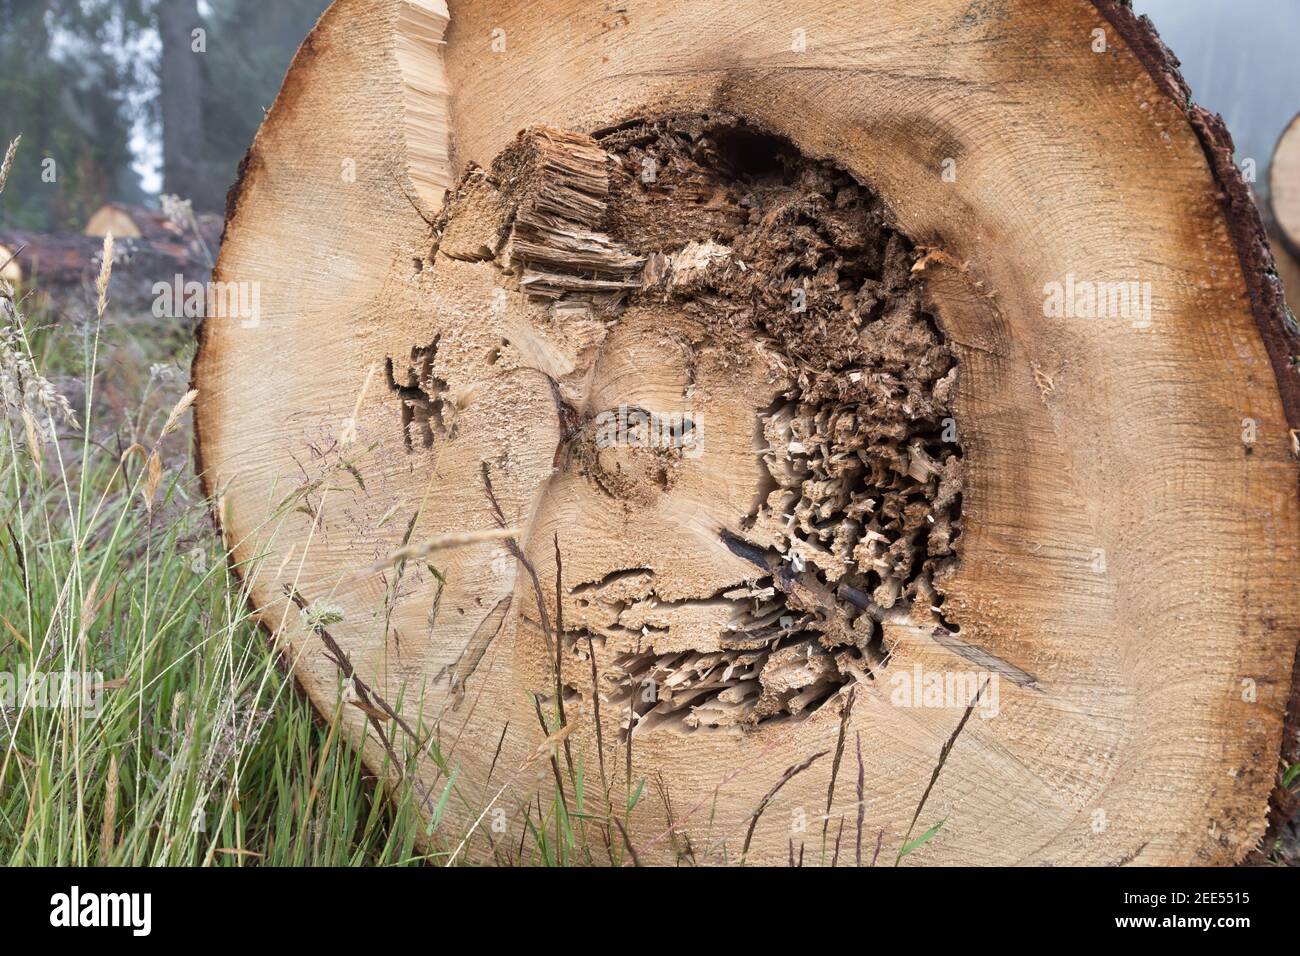 cut end of a tree trunk with insect damage Stock Photo